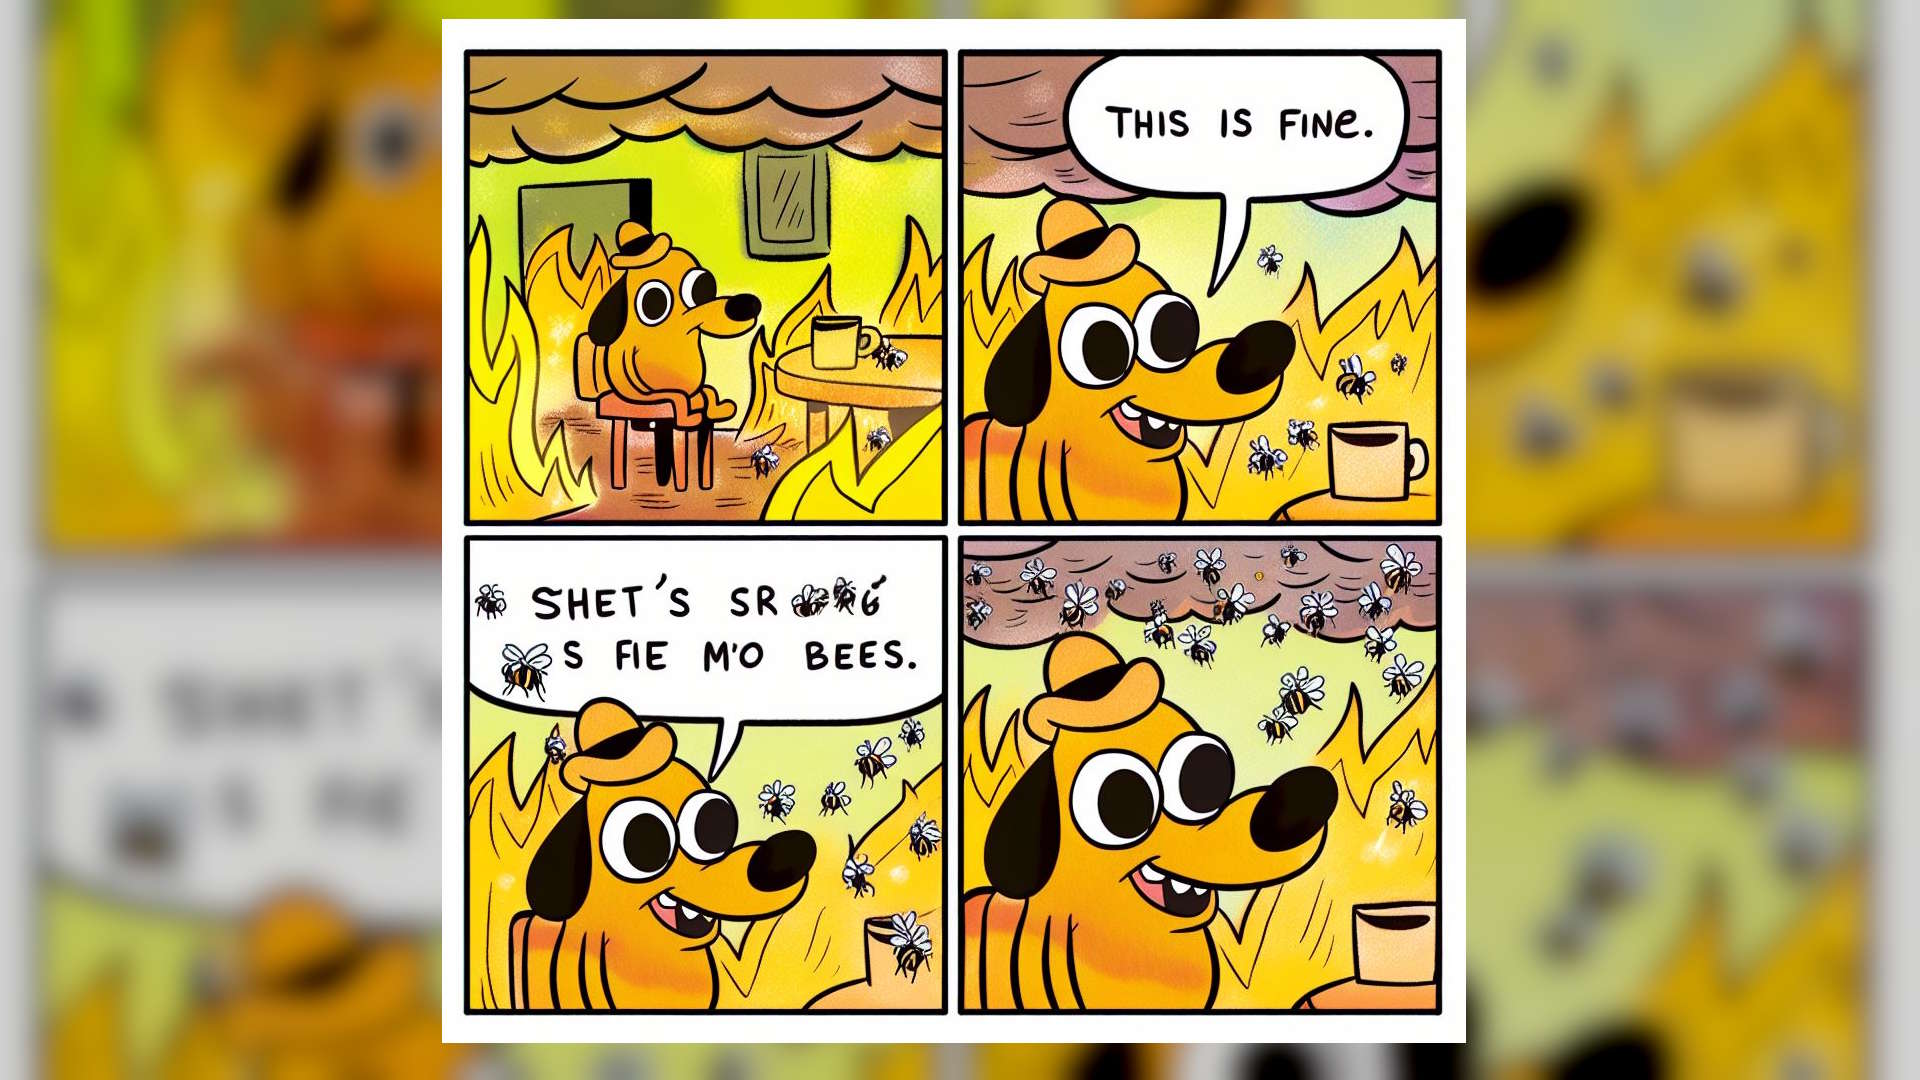  Copilot and ChatGPT iterating 'This is fine' memes perfectly captures the current state of AI: faintly alarming hilarious madness 